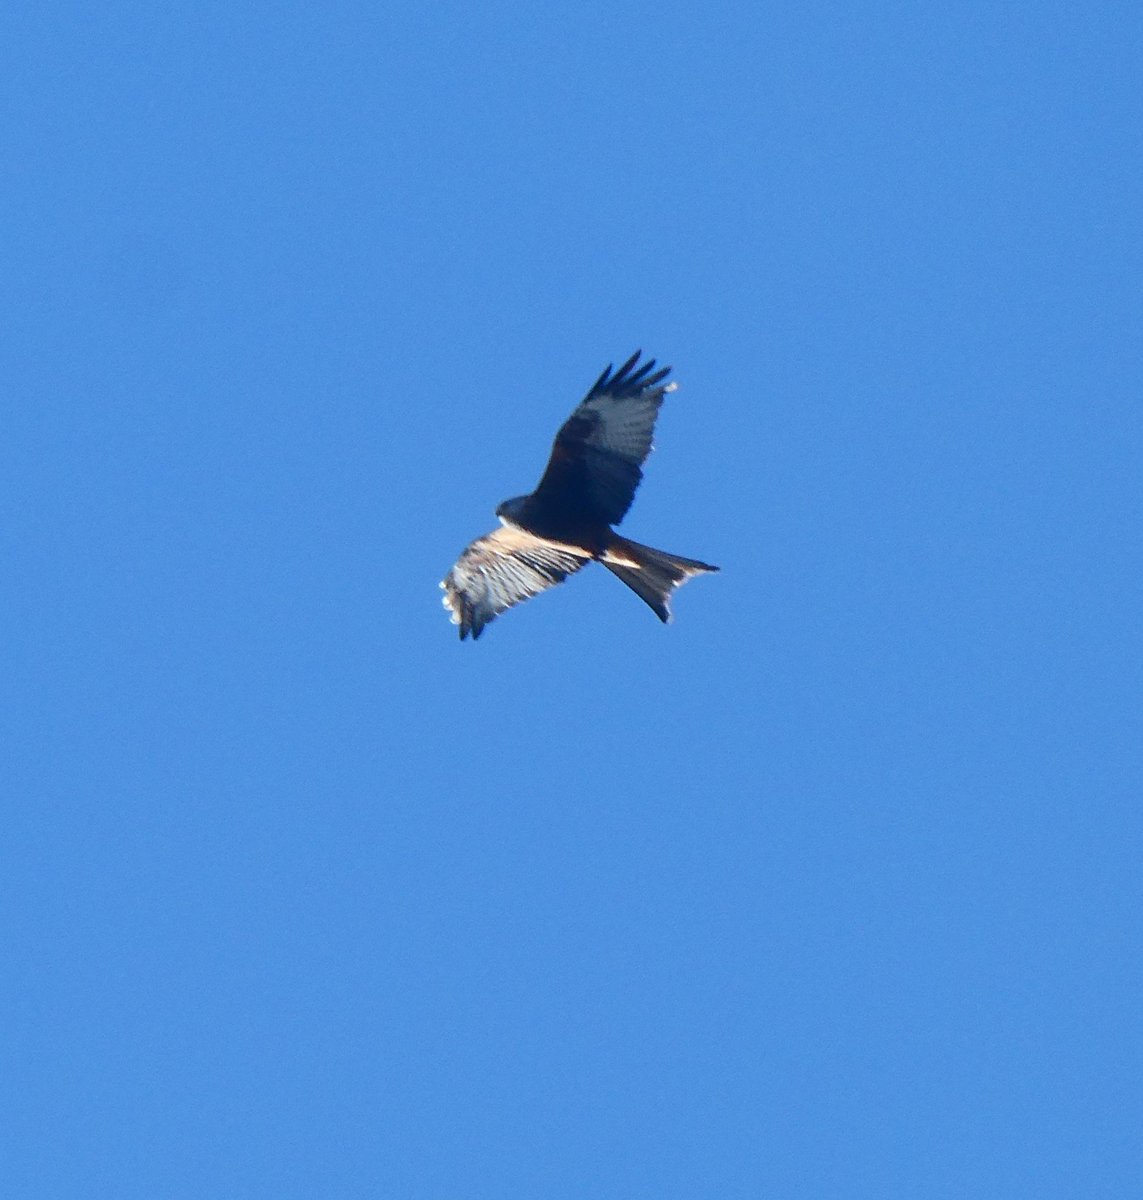 Red kite circle overhead in Radyr yesterday afternoon.

First one I've seen in the area

#glambirds